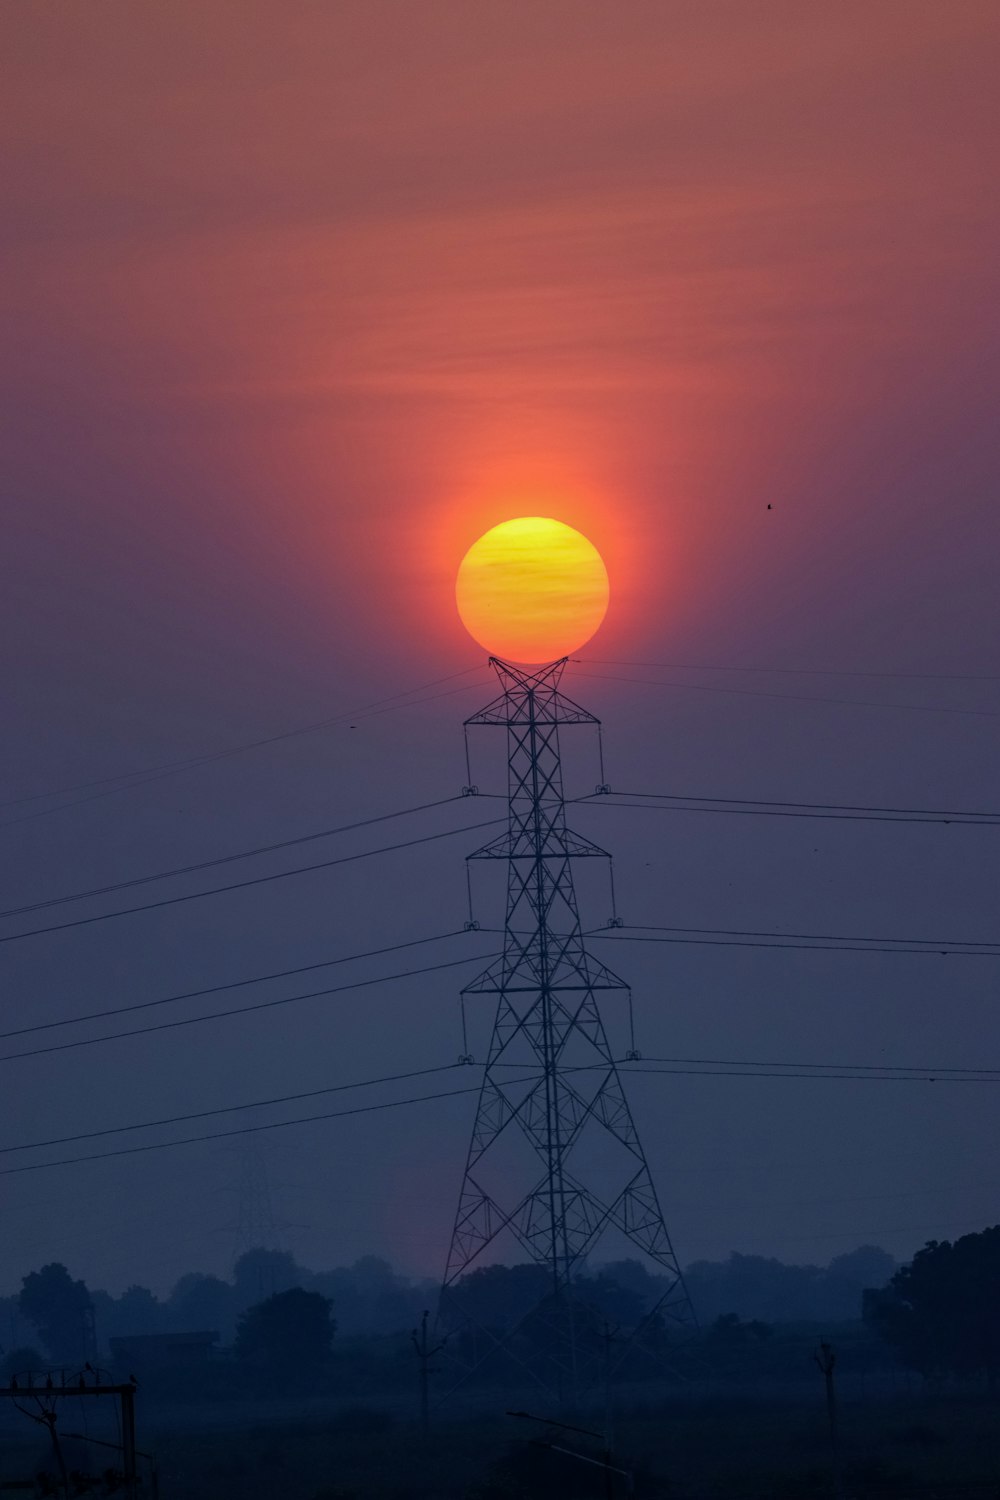 the sun is setting behind a power line